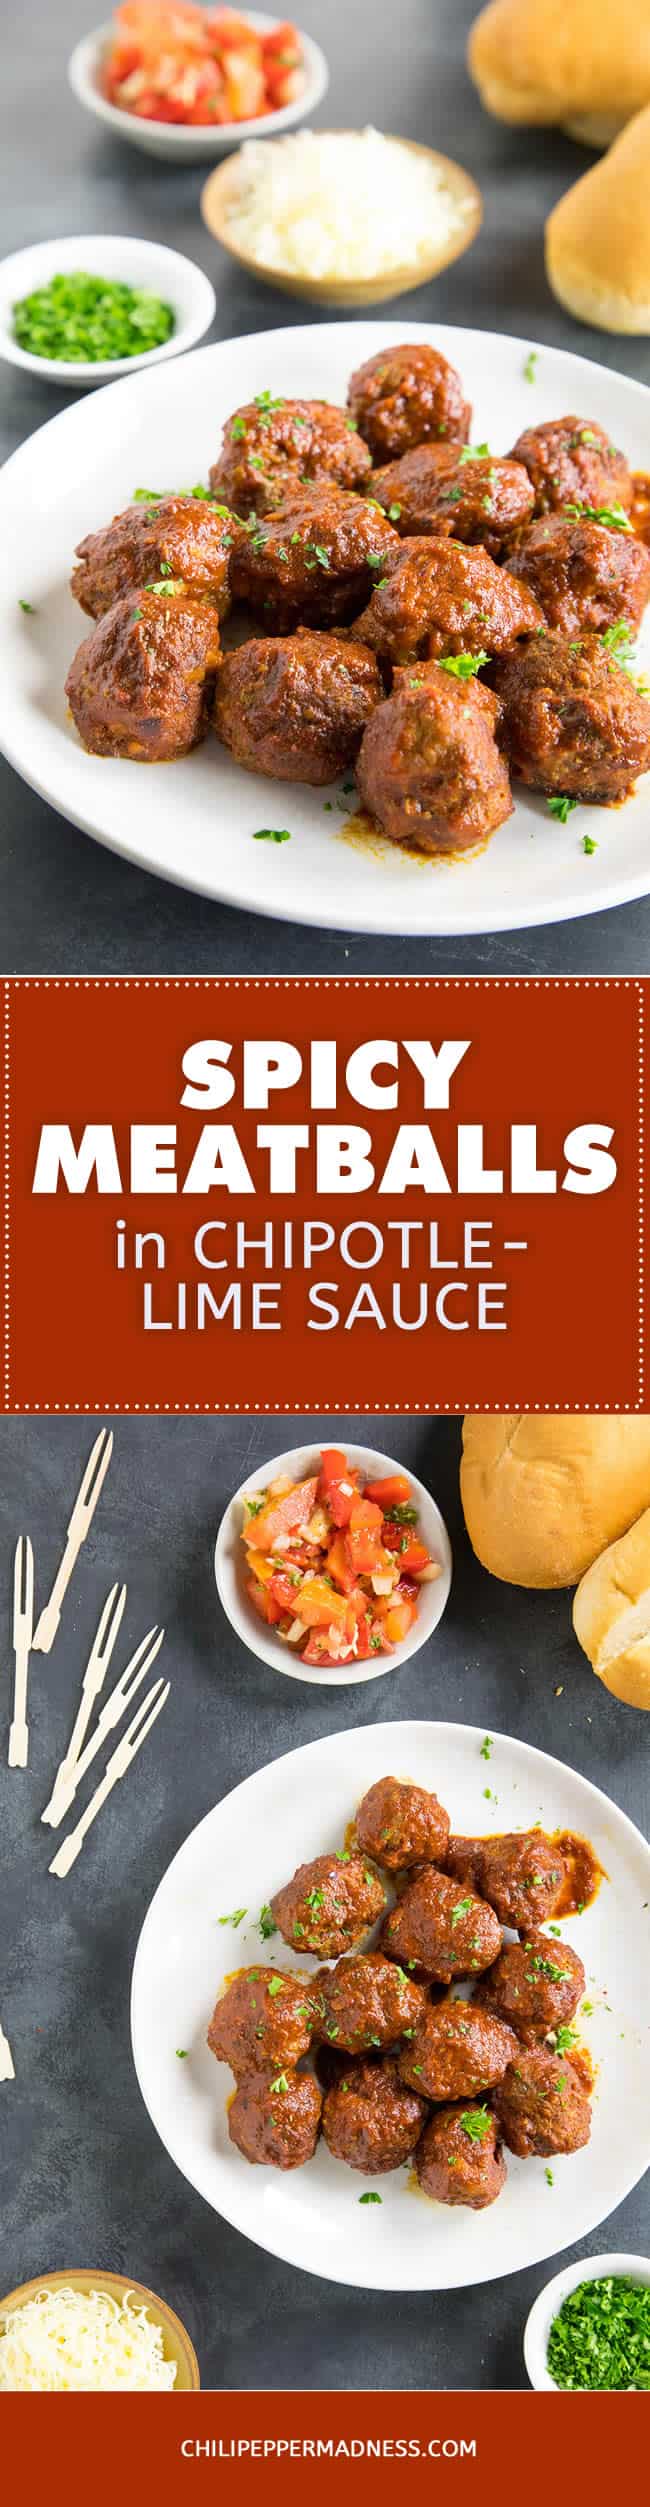 Spicy Meatballs in Chipotle-Lime Sauce - Recipe | ChiliPepperMadness.com #meatballs #chipotle #appetizer #spicyfood